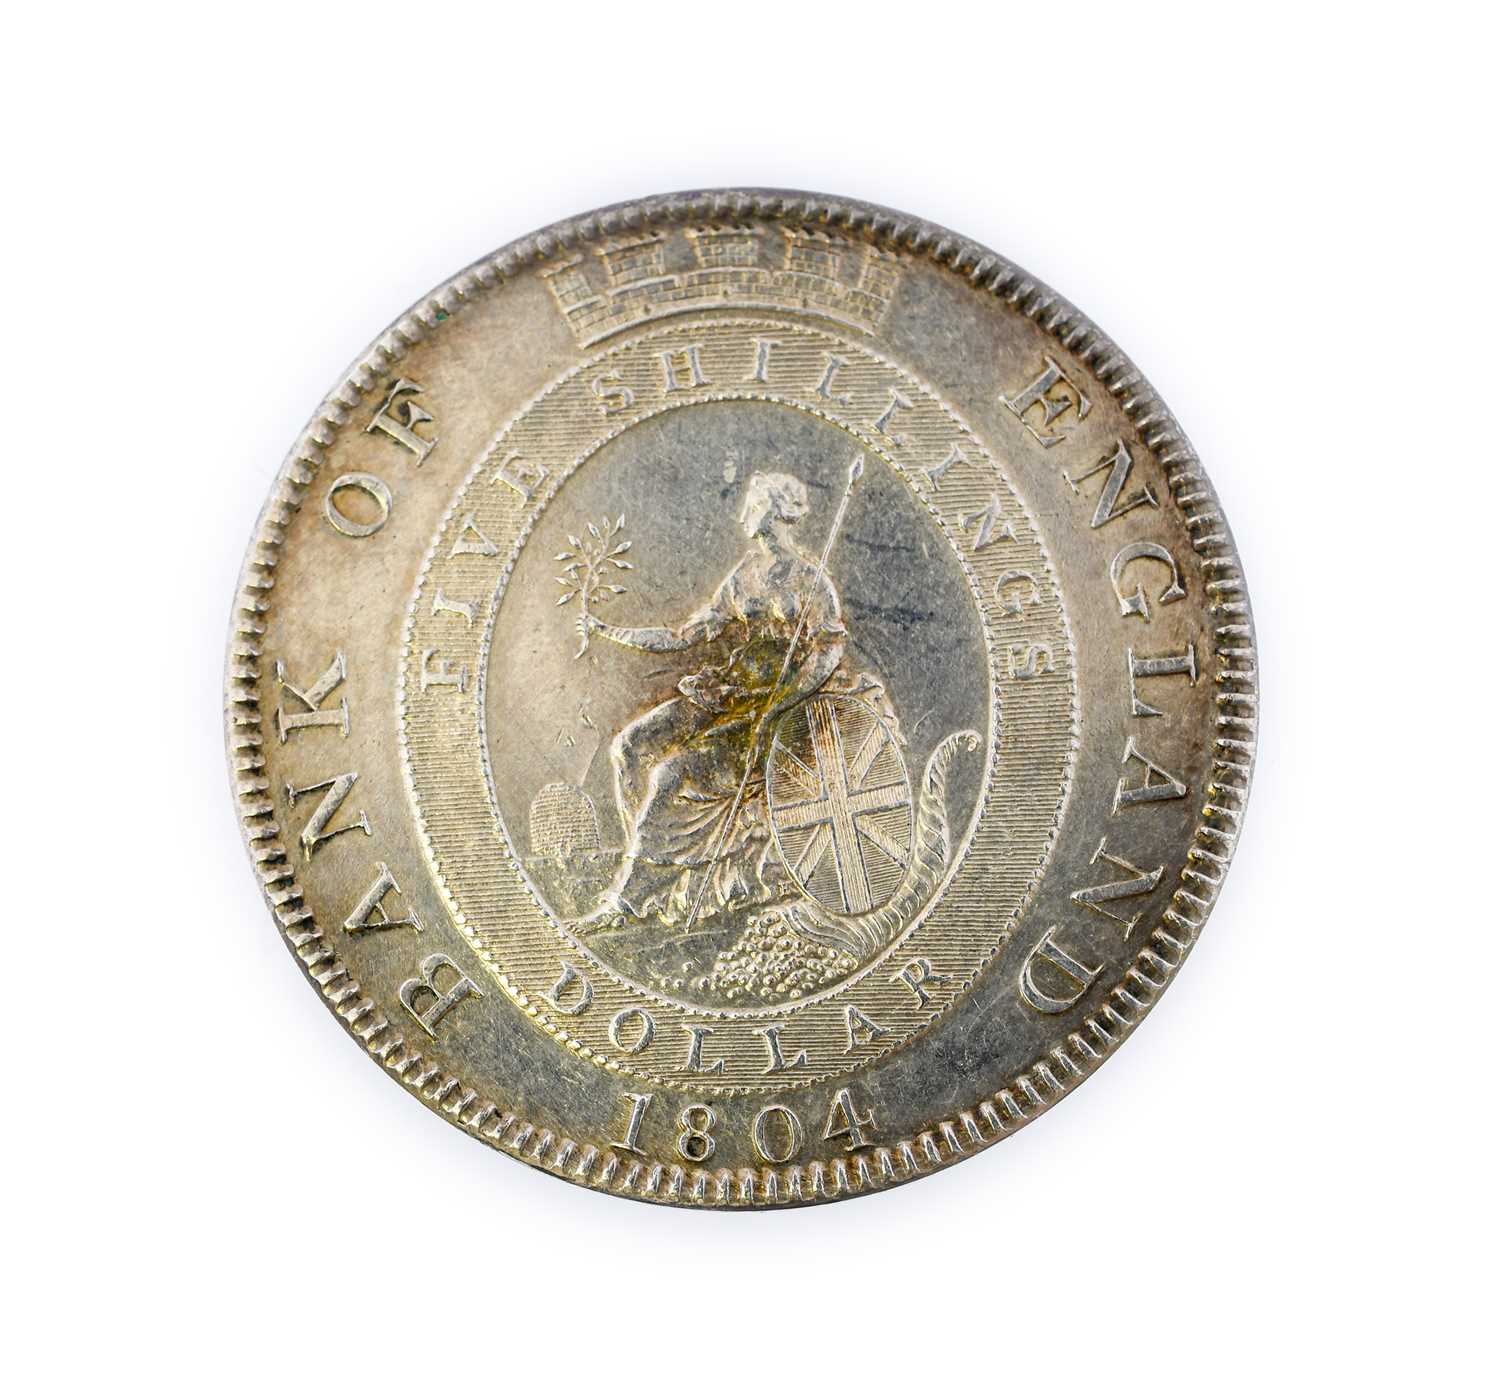 George III, Bank of England Dollar 1804, obv. older laureate & draped bust, C.H.K. with stops on